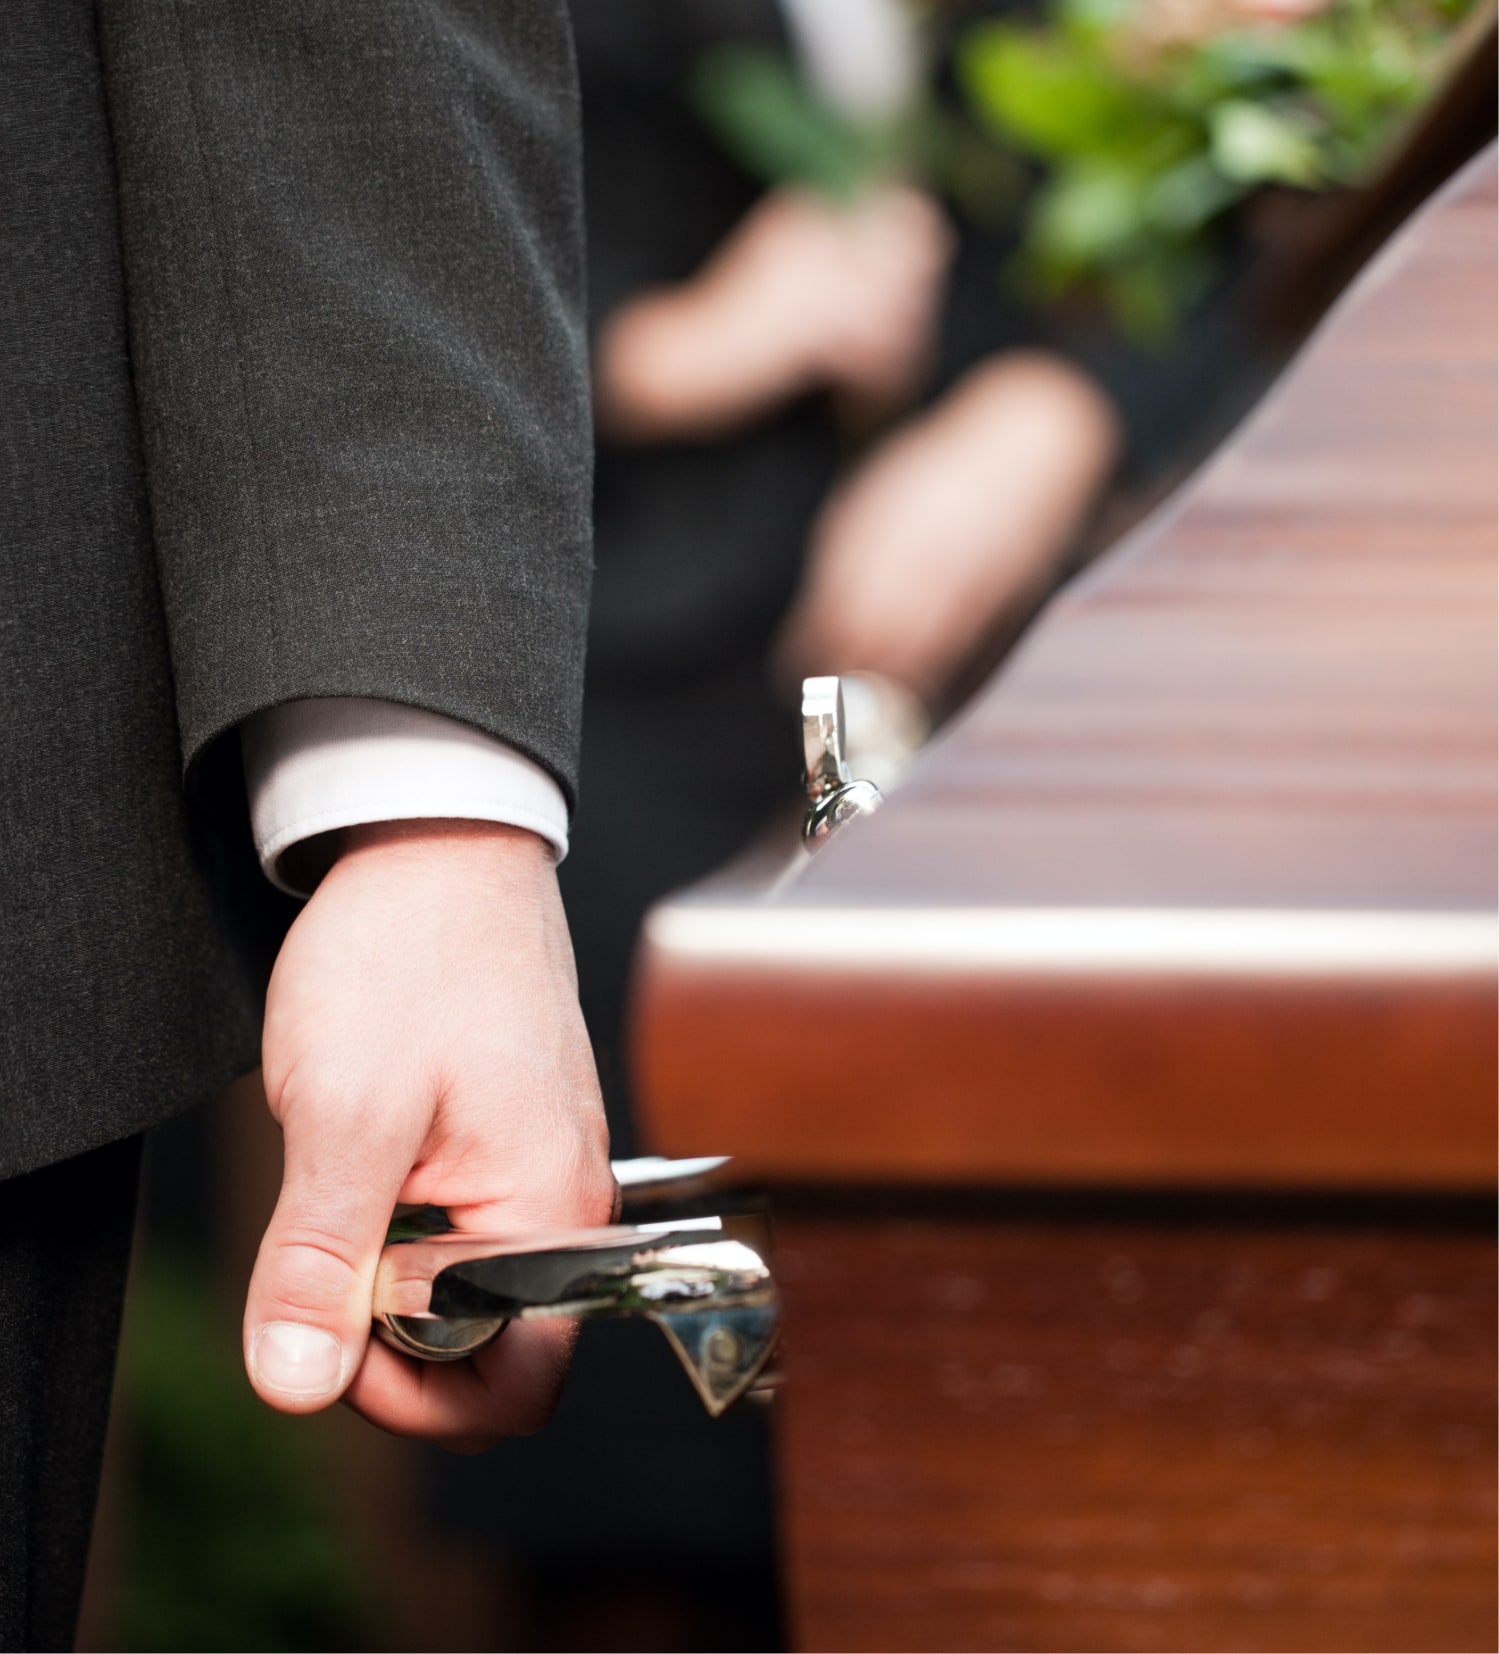 PREPAID FUNERAL PLANS AVAILABLE